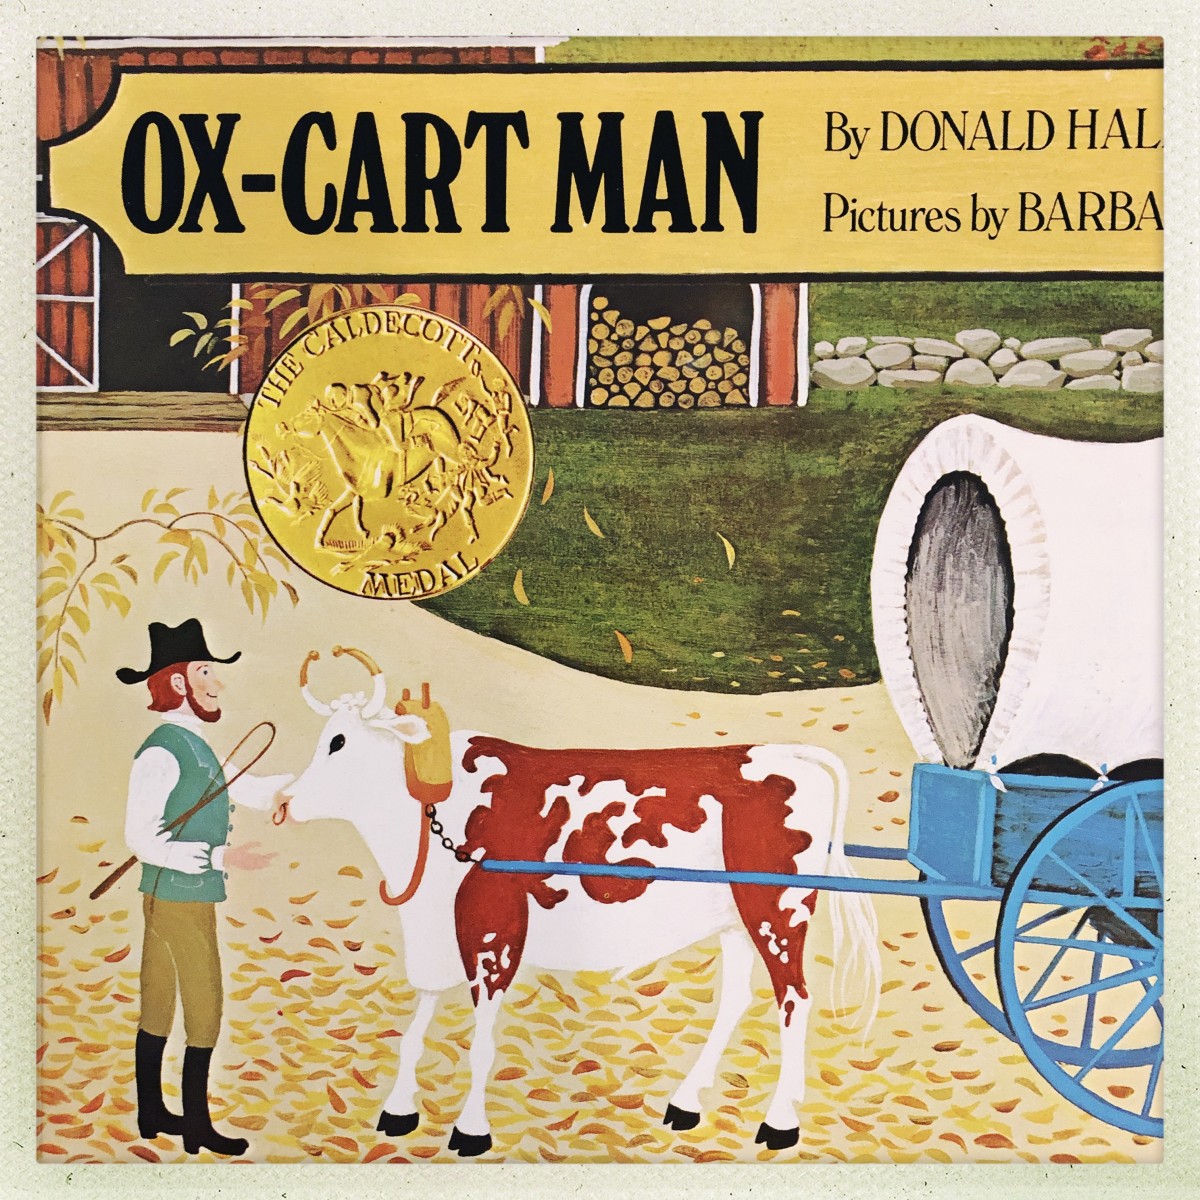 Book recommendation: "The Ox-Cart Man."